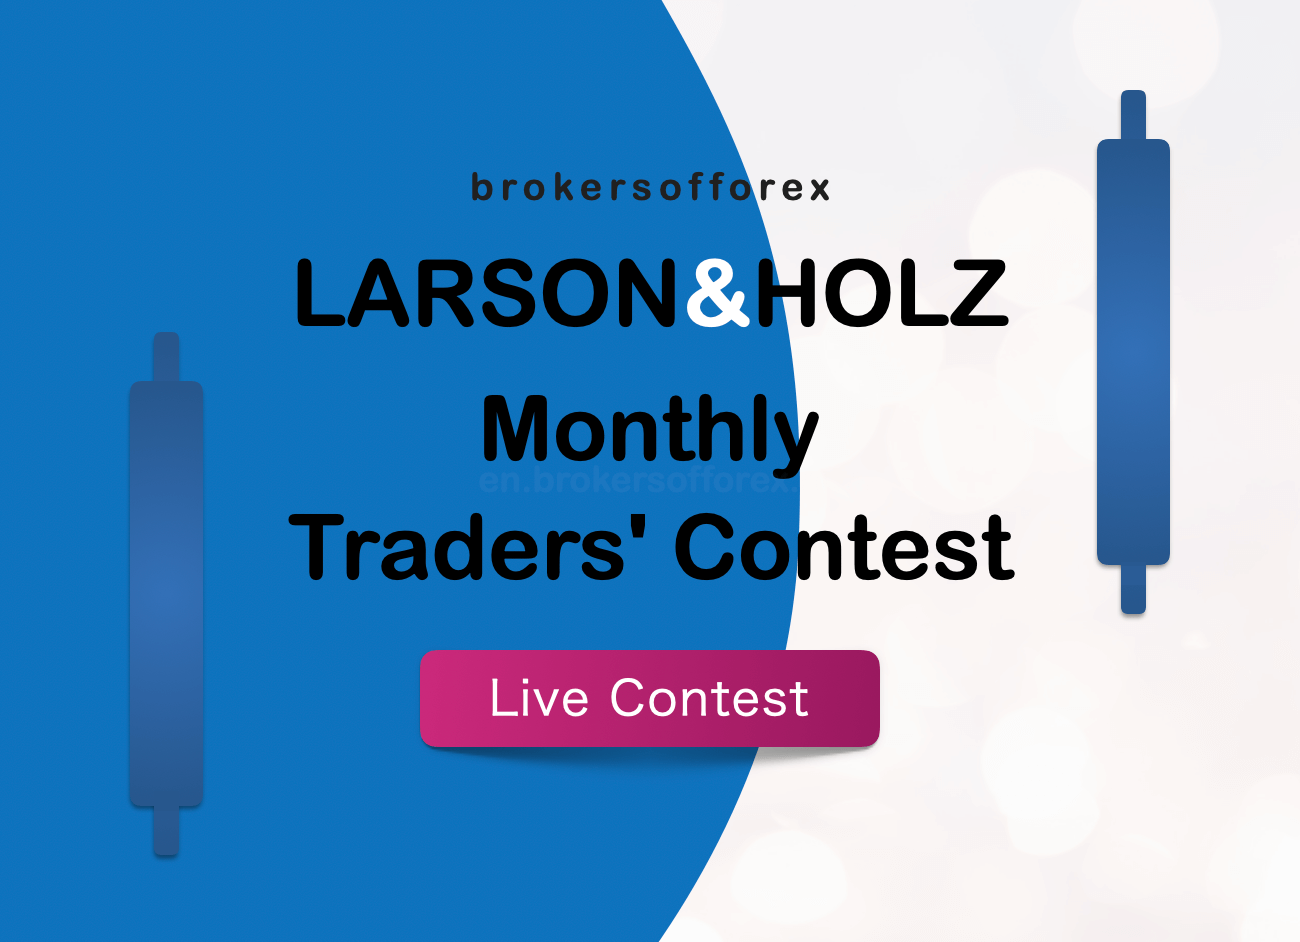 LarsonHolz Monthly Traders Contest